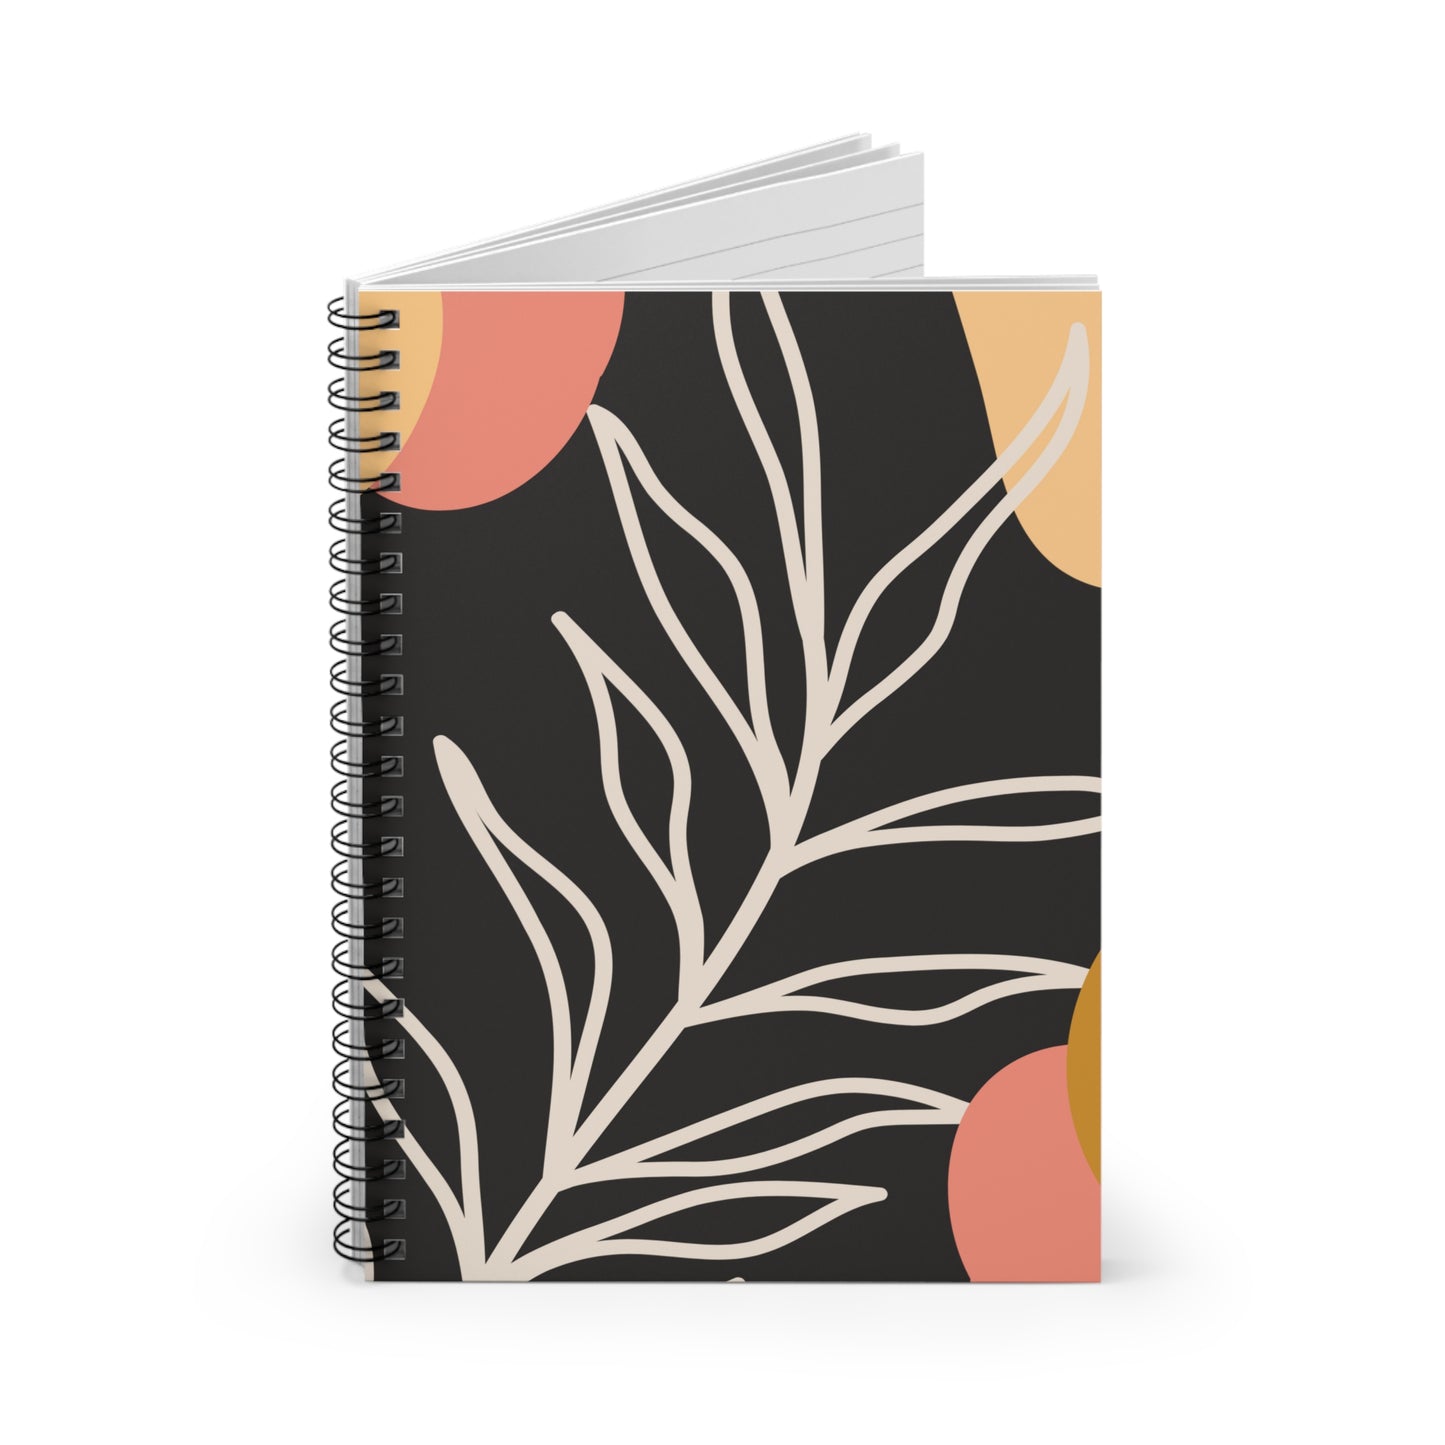 Fall Colors: Spiral Notebook - Log Books - Journals - Diaries - and More Custom Printed by TheGlassyLass